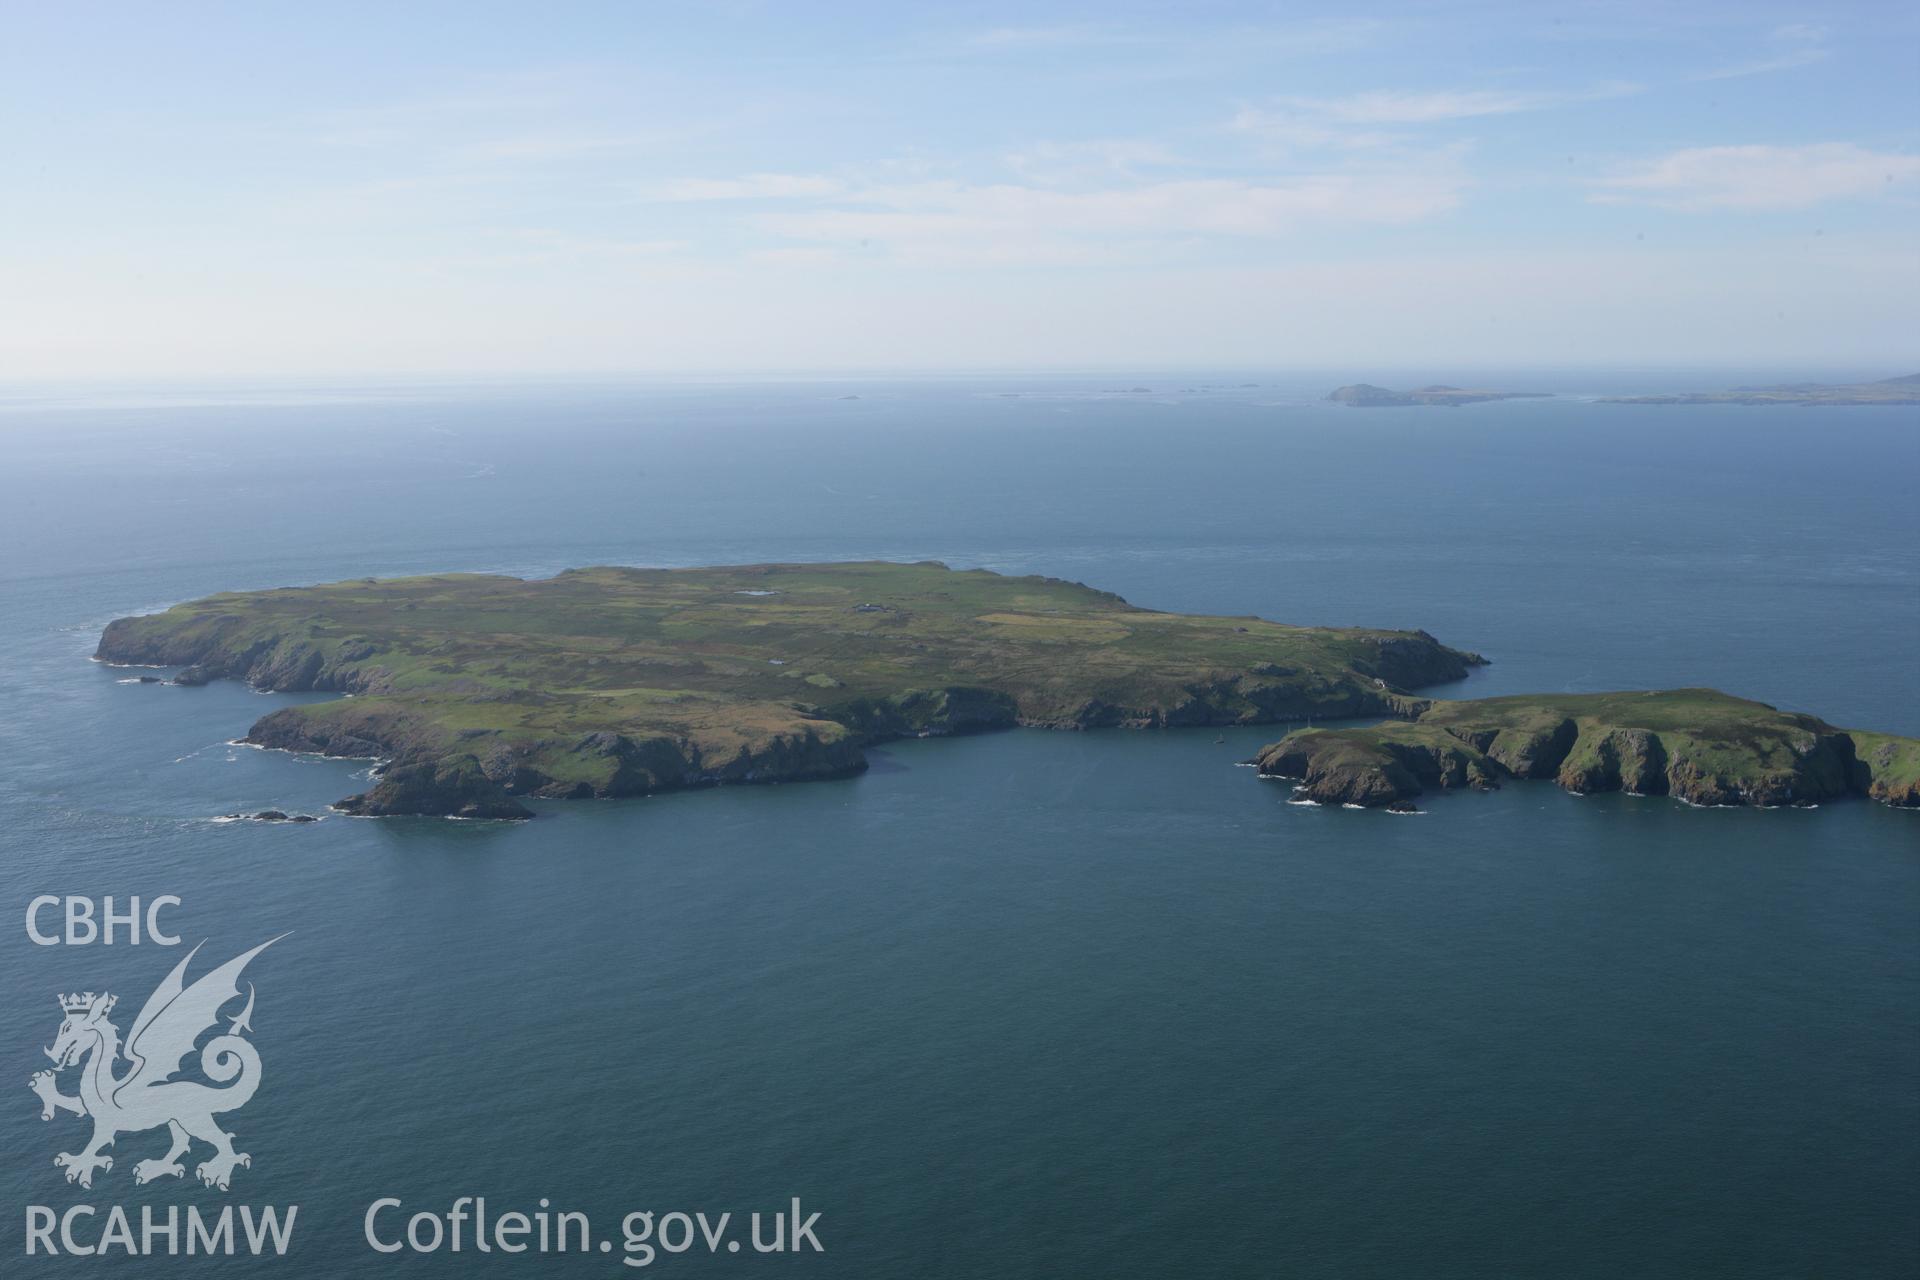 RCAHMW colour oblique aerial photograph of Skomer Island. Taken on 30 July 2007 by Toby Driver